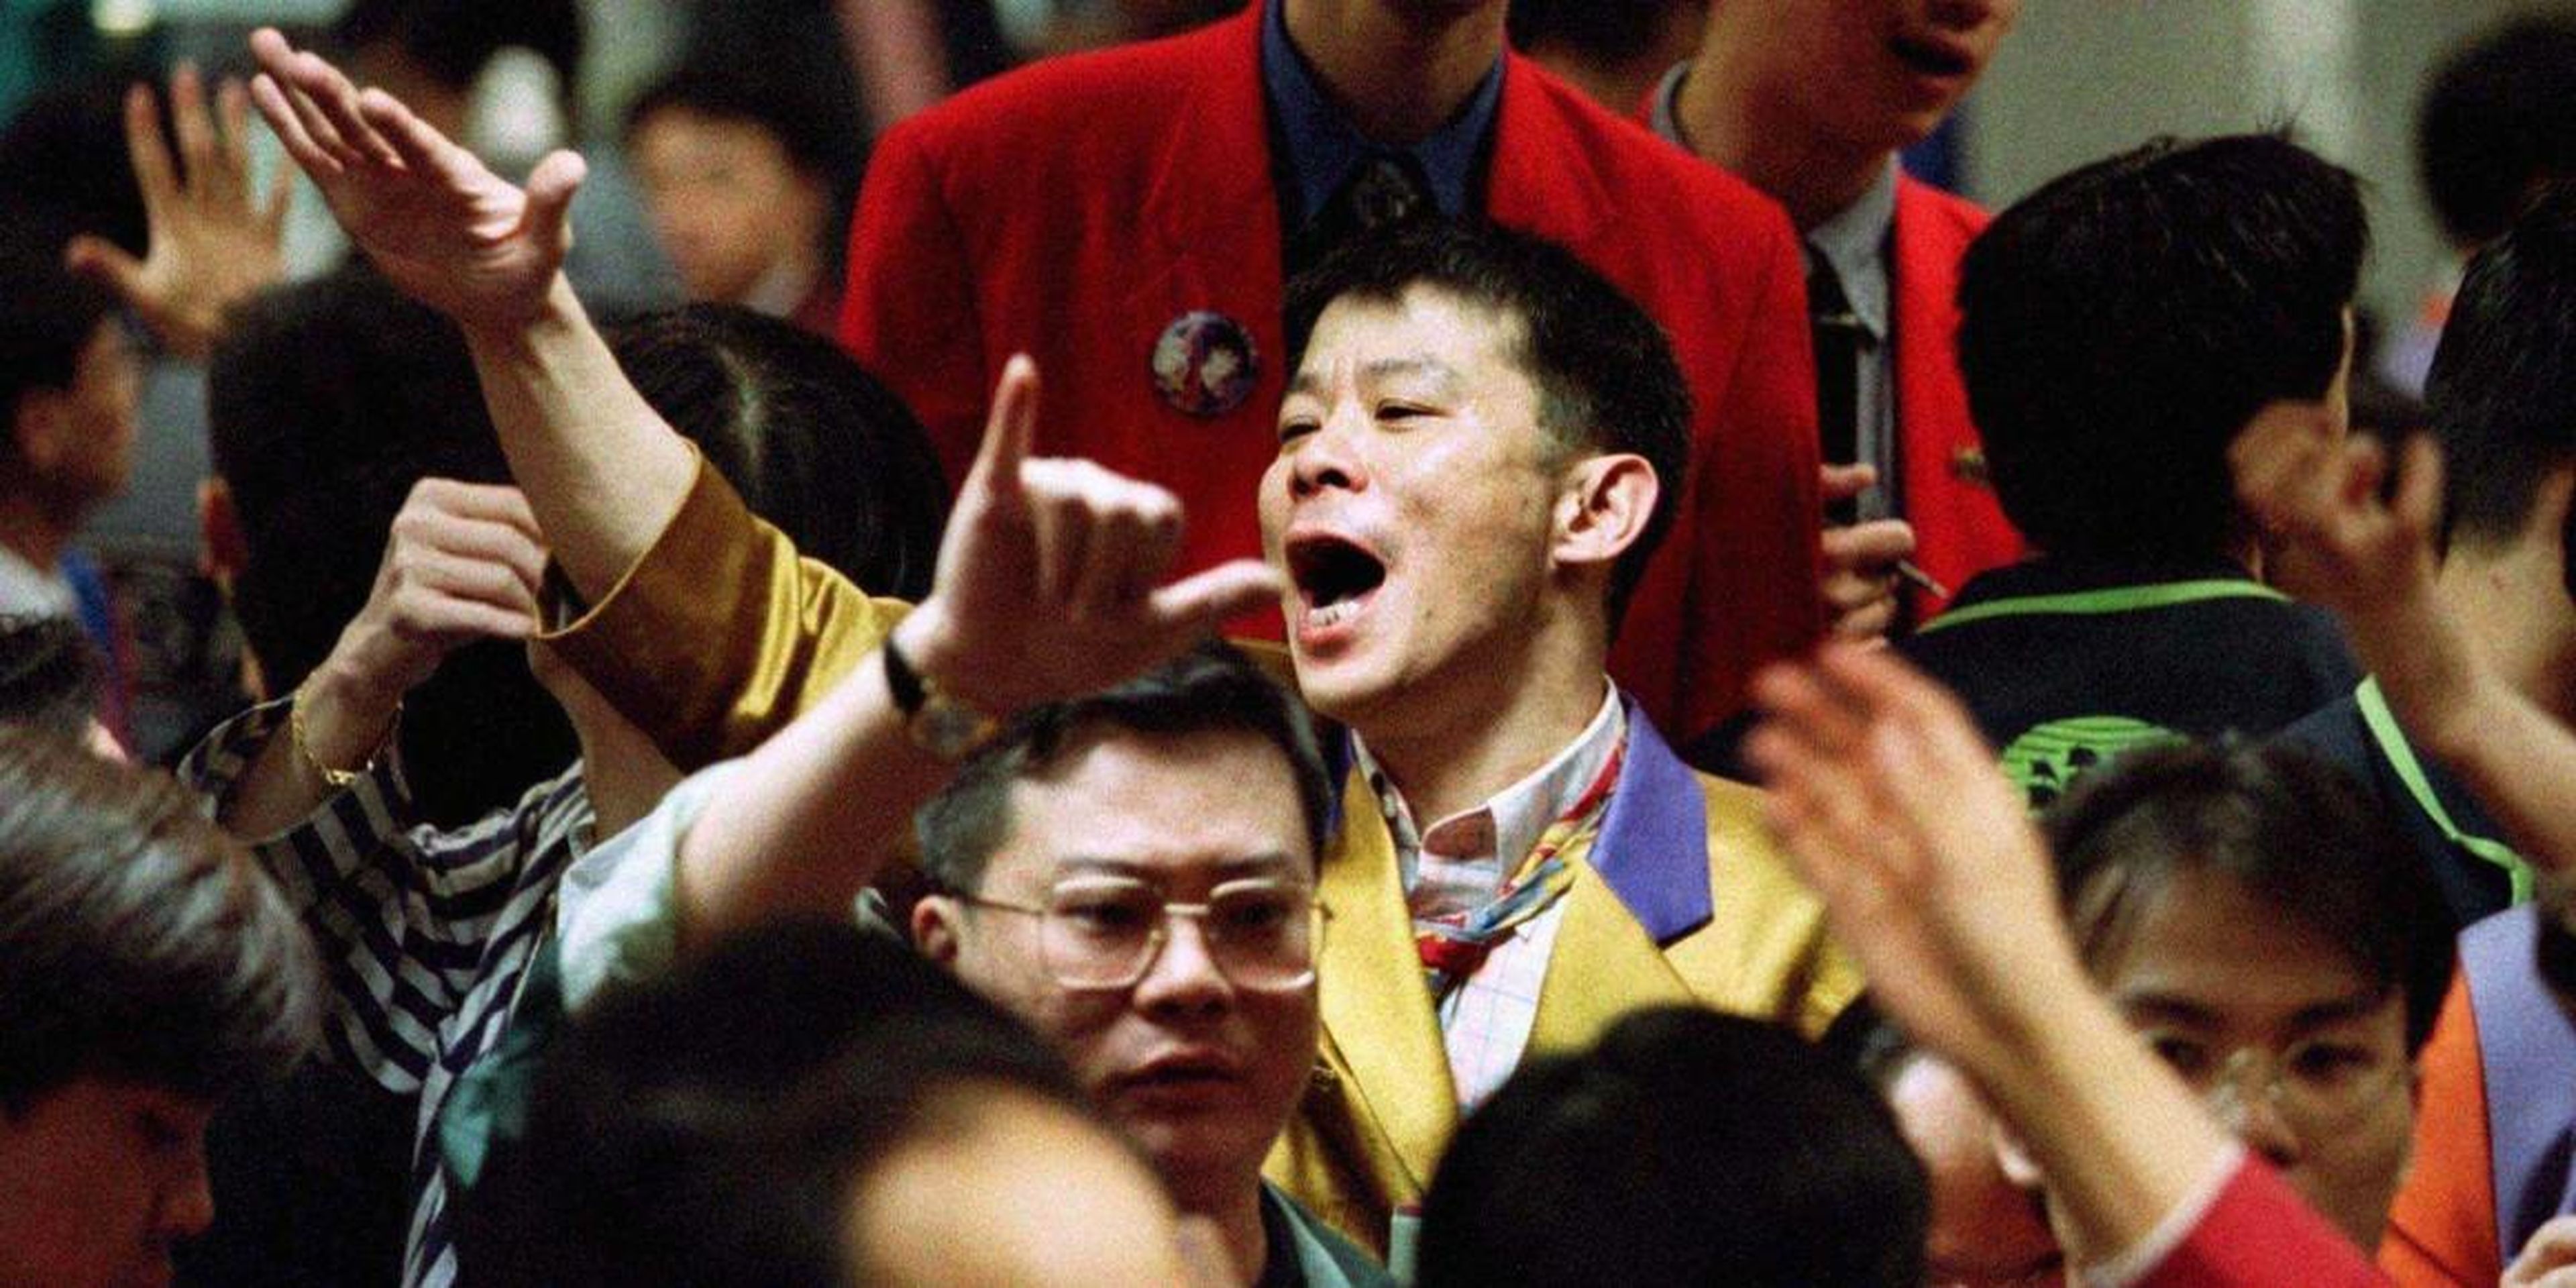 Shares in a mysterious Hong Kong investment company have jumped 8,500% in 5 years, and no one really knows why